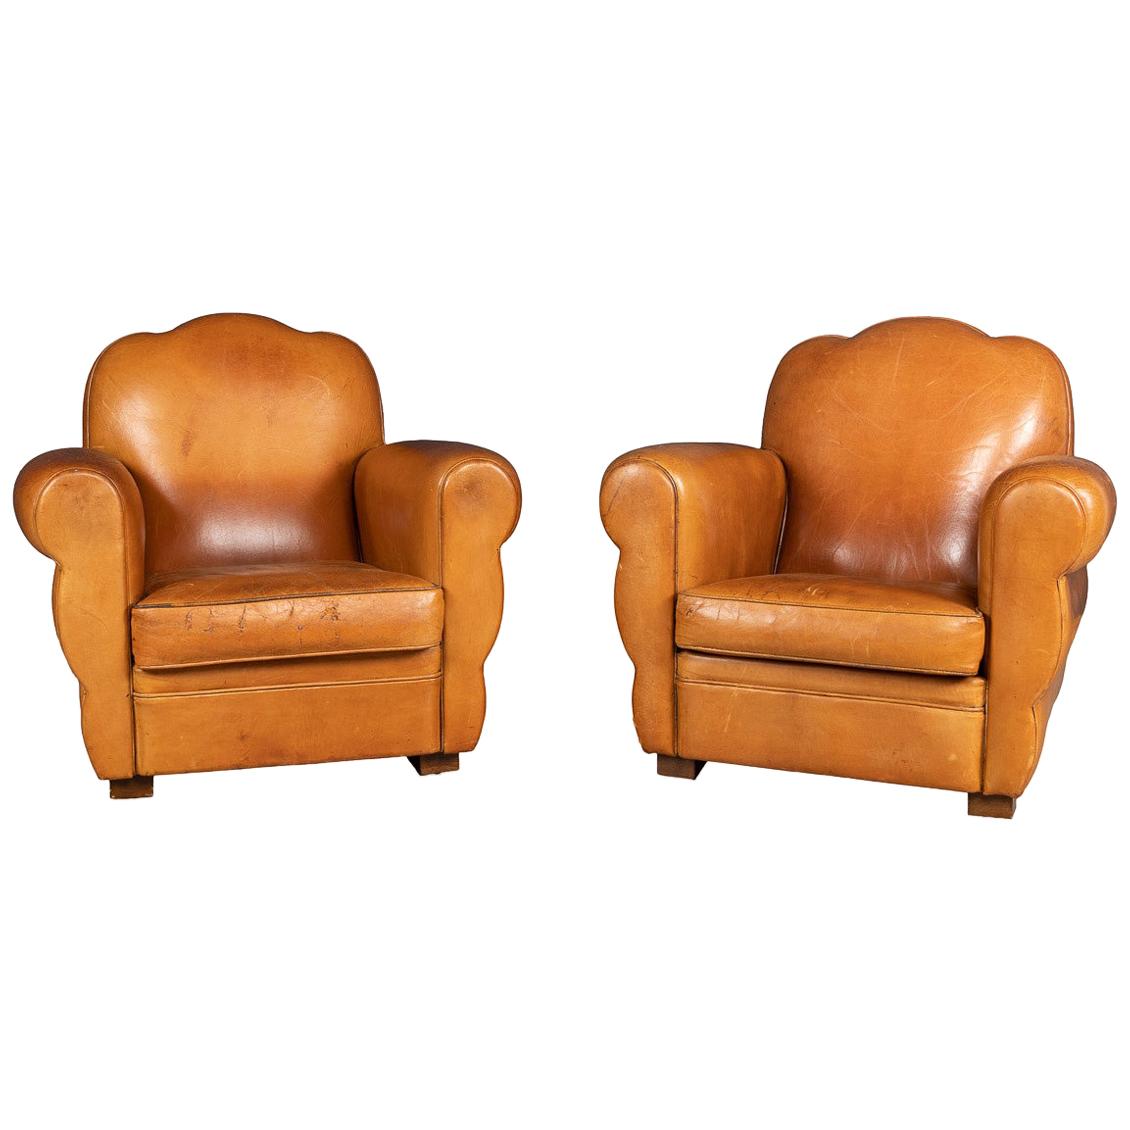 20th Century French Pair of Art Deco Style Leather Club Chairs, circa 1980